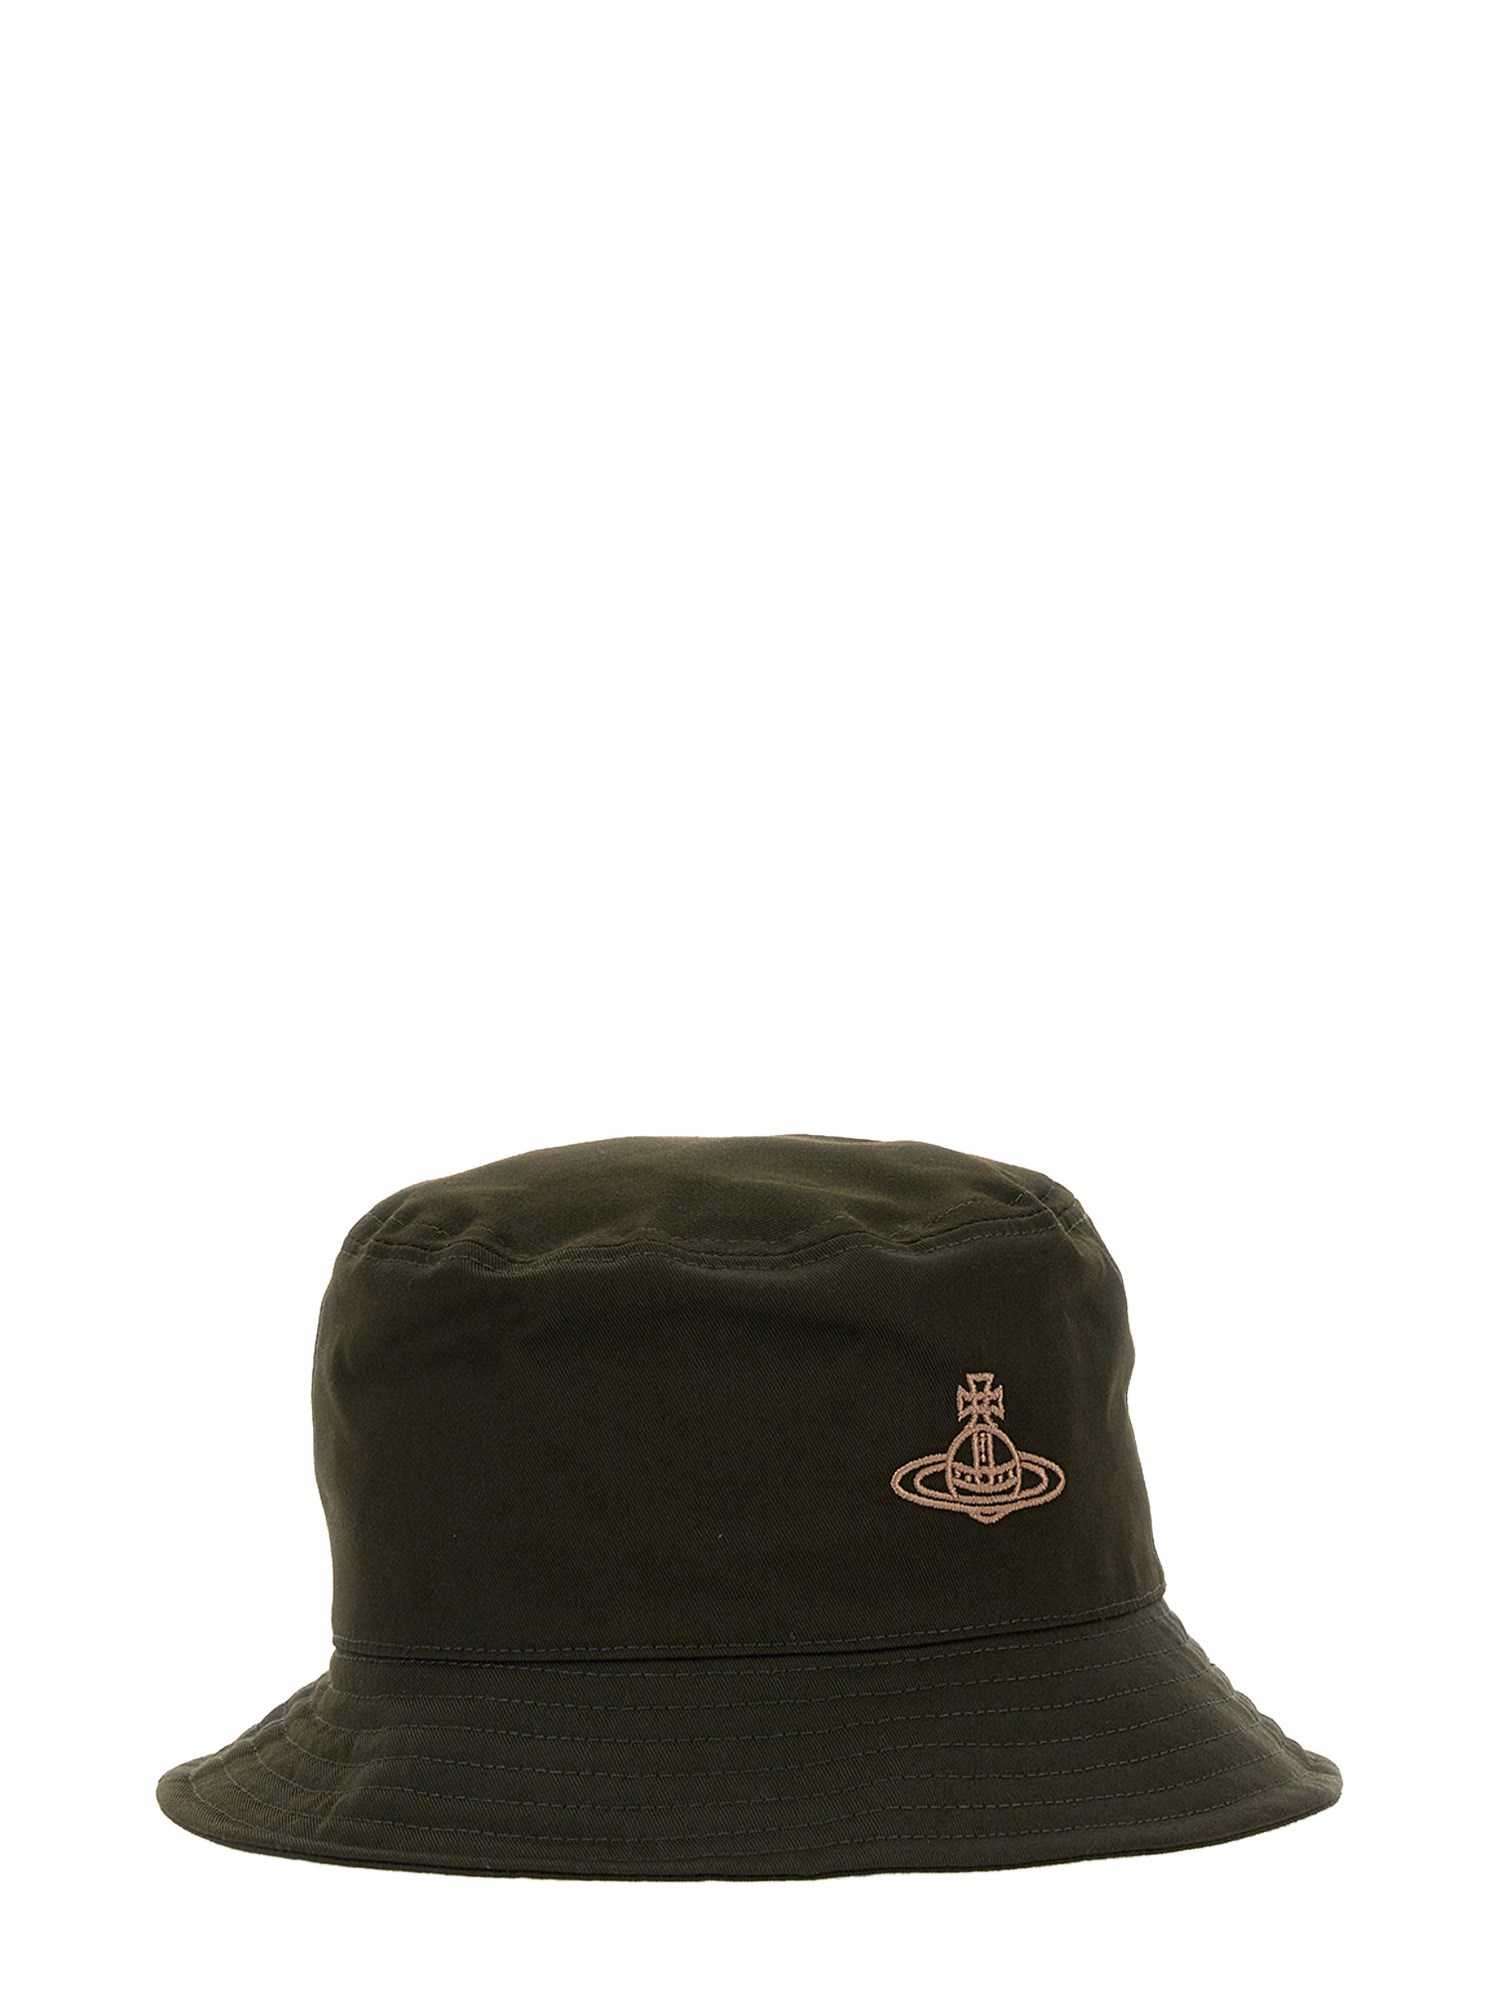 vivienne westwood bucket hat with logo embroidery